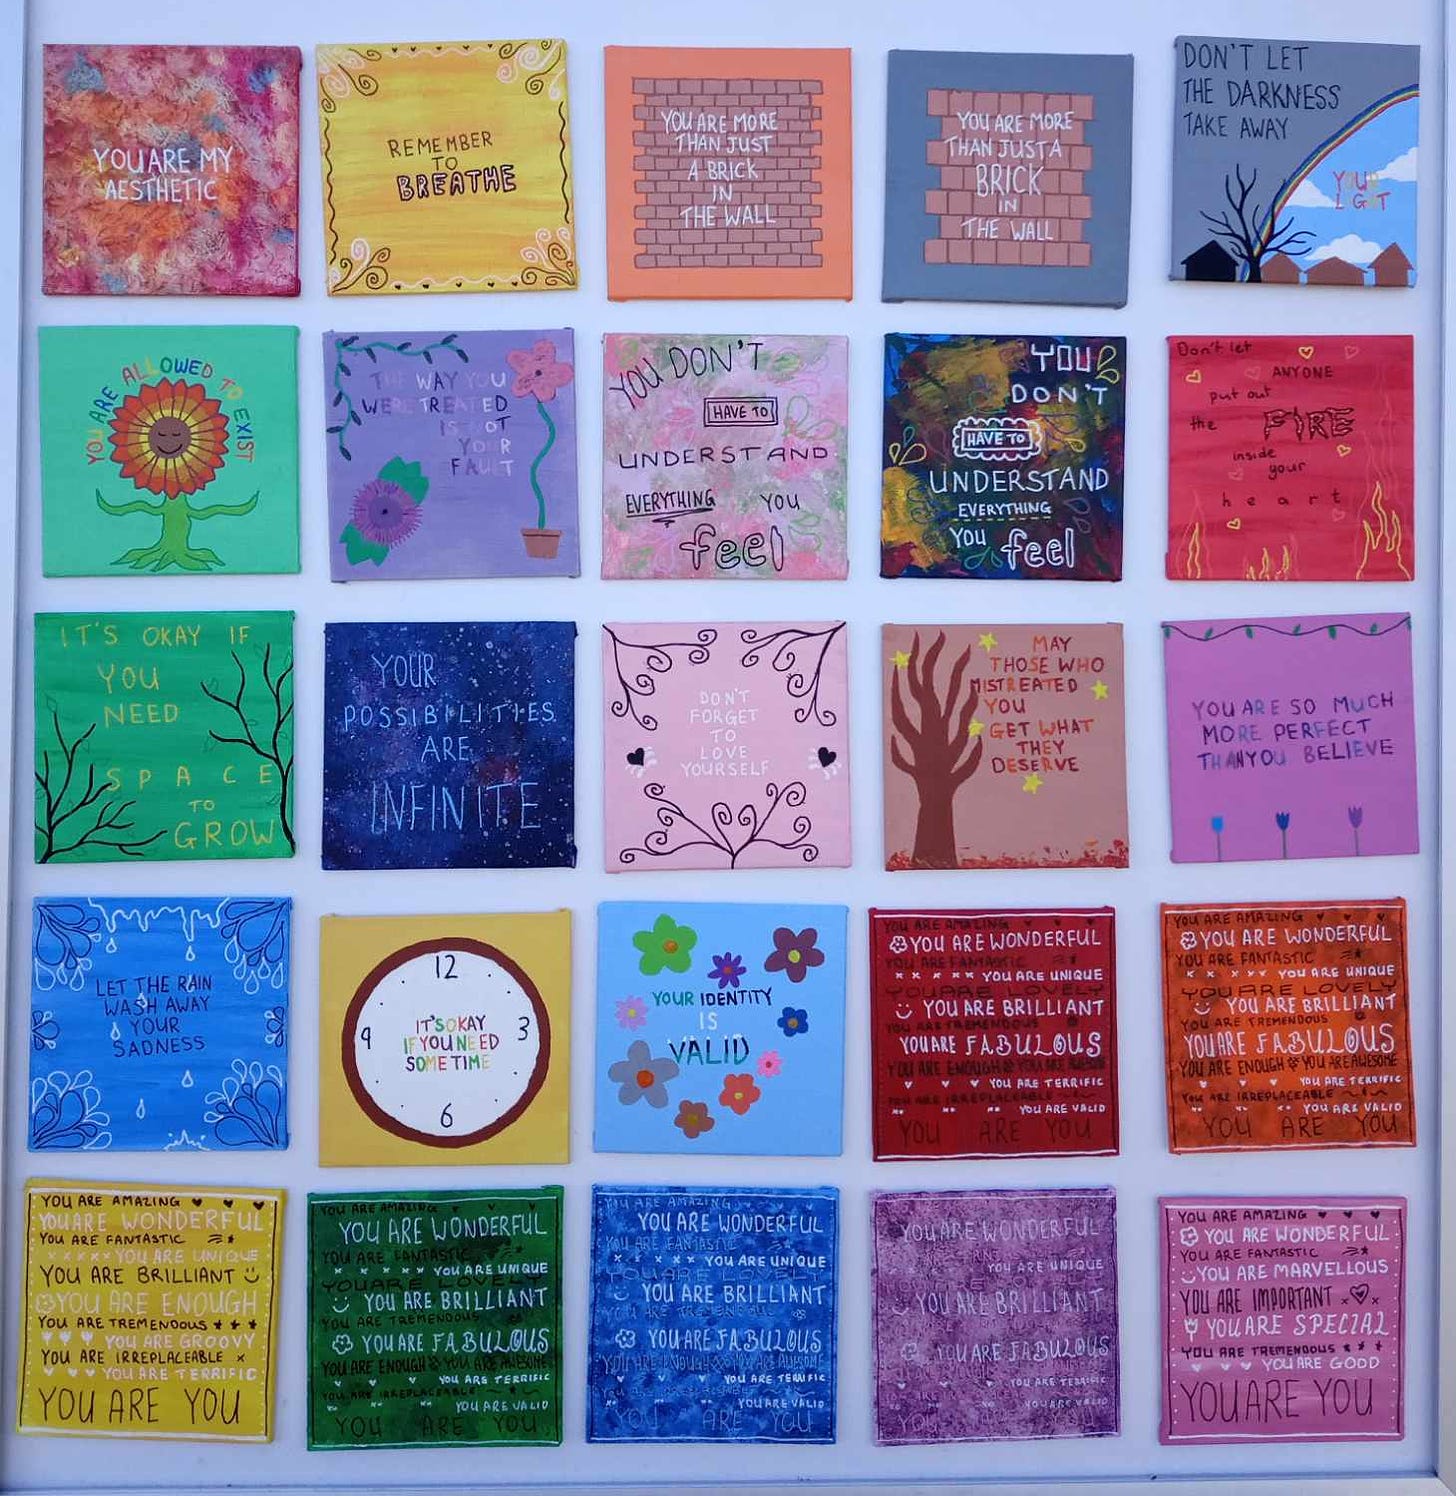 photo of 25 small paintings in a 5x5 setup. they each have a positive quote and some little doodles. some are more detailed than others.